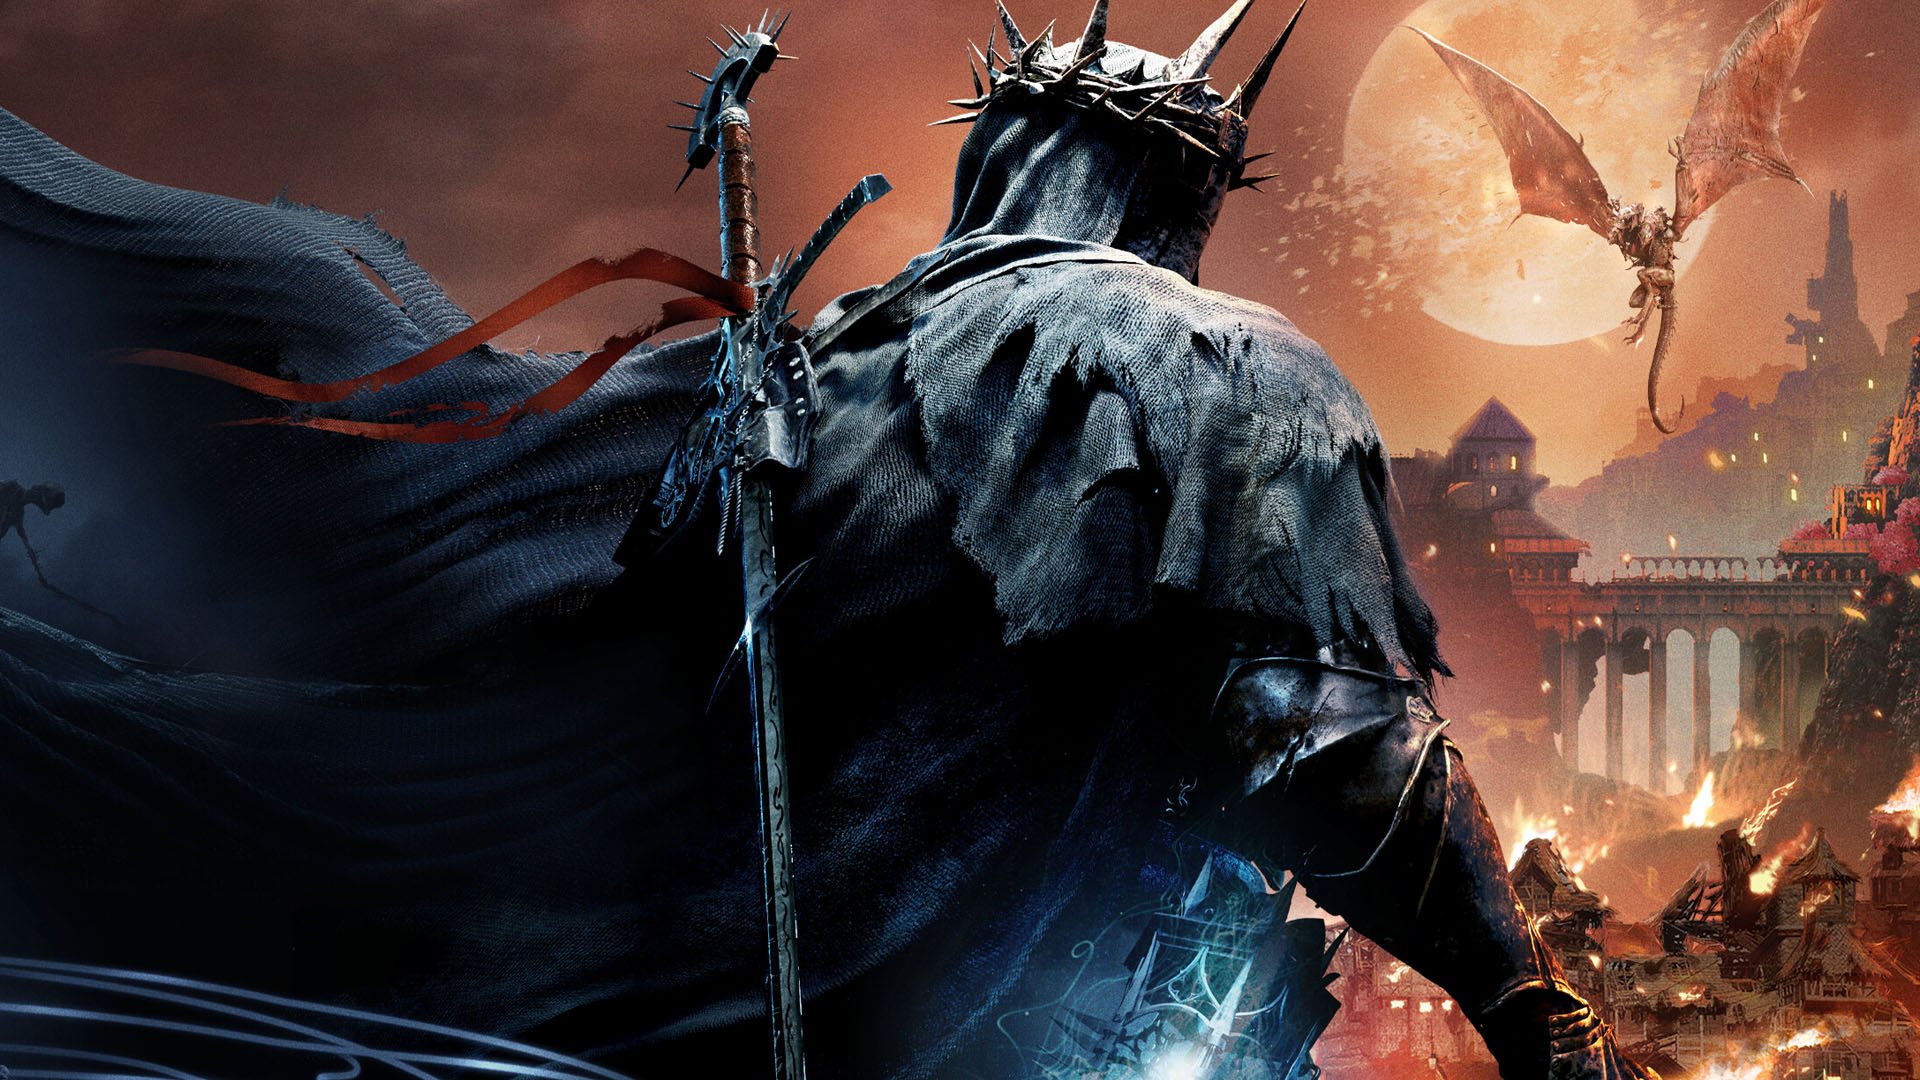 Lords of the Fallen  Download and Buy Today - Epic Games Store